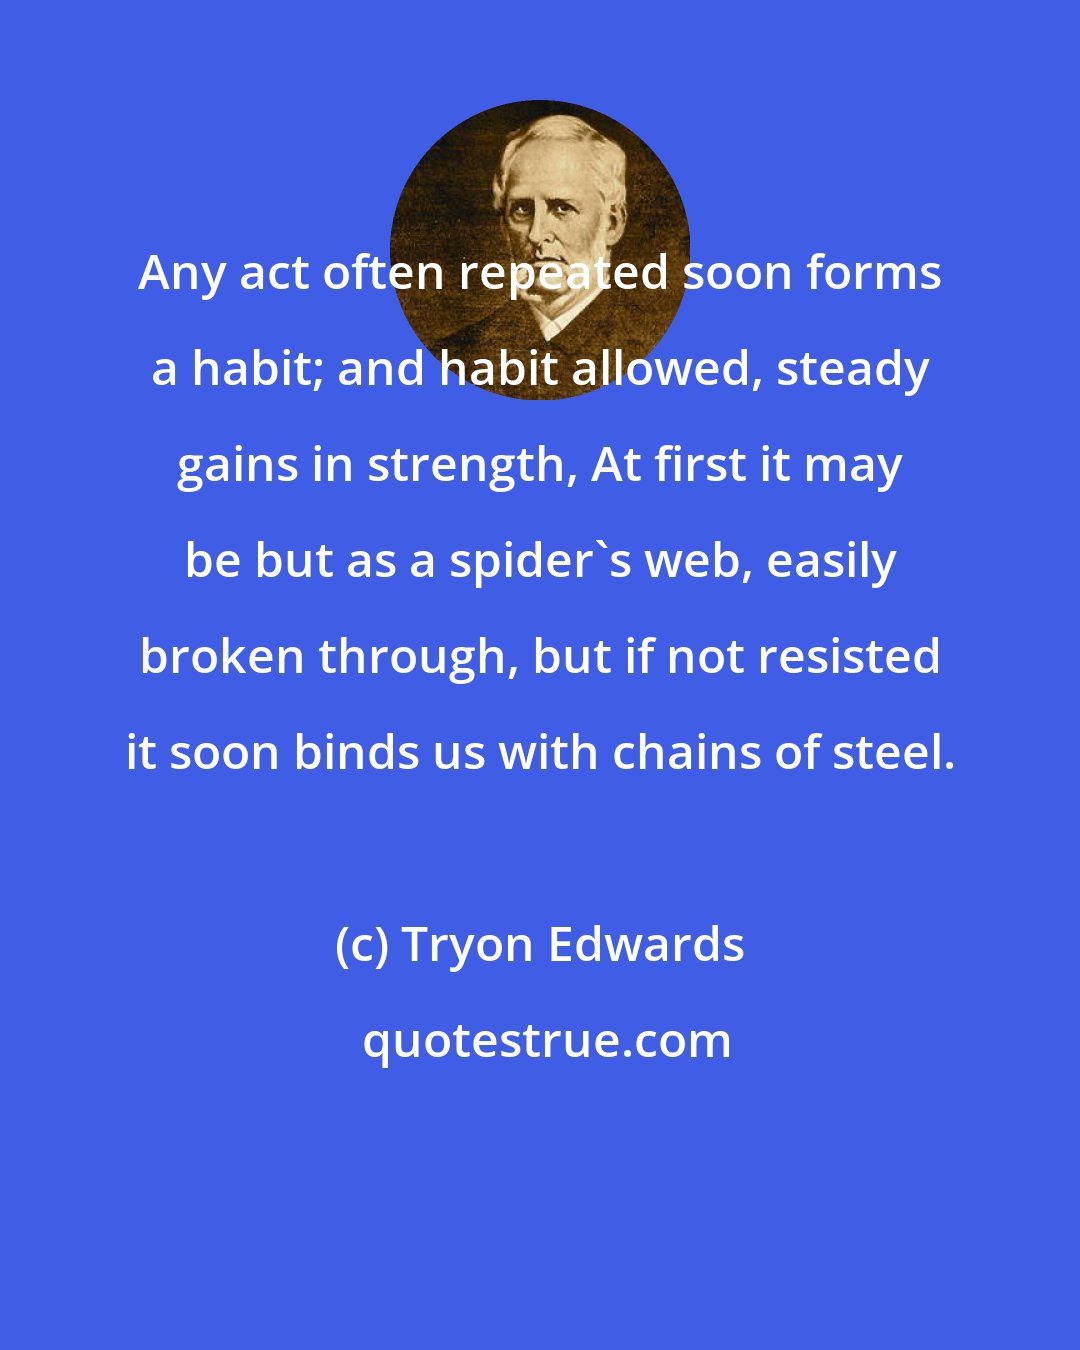 Tryon Edwards: Any act often repeated soon forms a habit; and habit allowed, steady gains in strength, At first it may be but as a spider's web, easily broken through, but if not resisted it soon binds us with chains of steel.